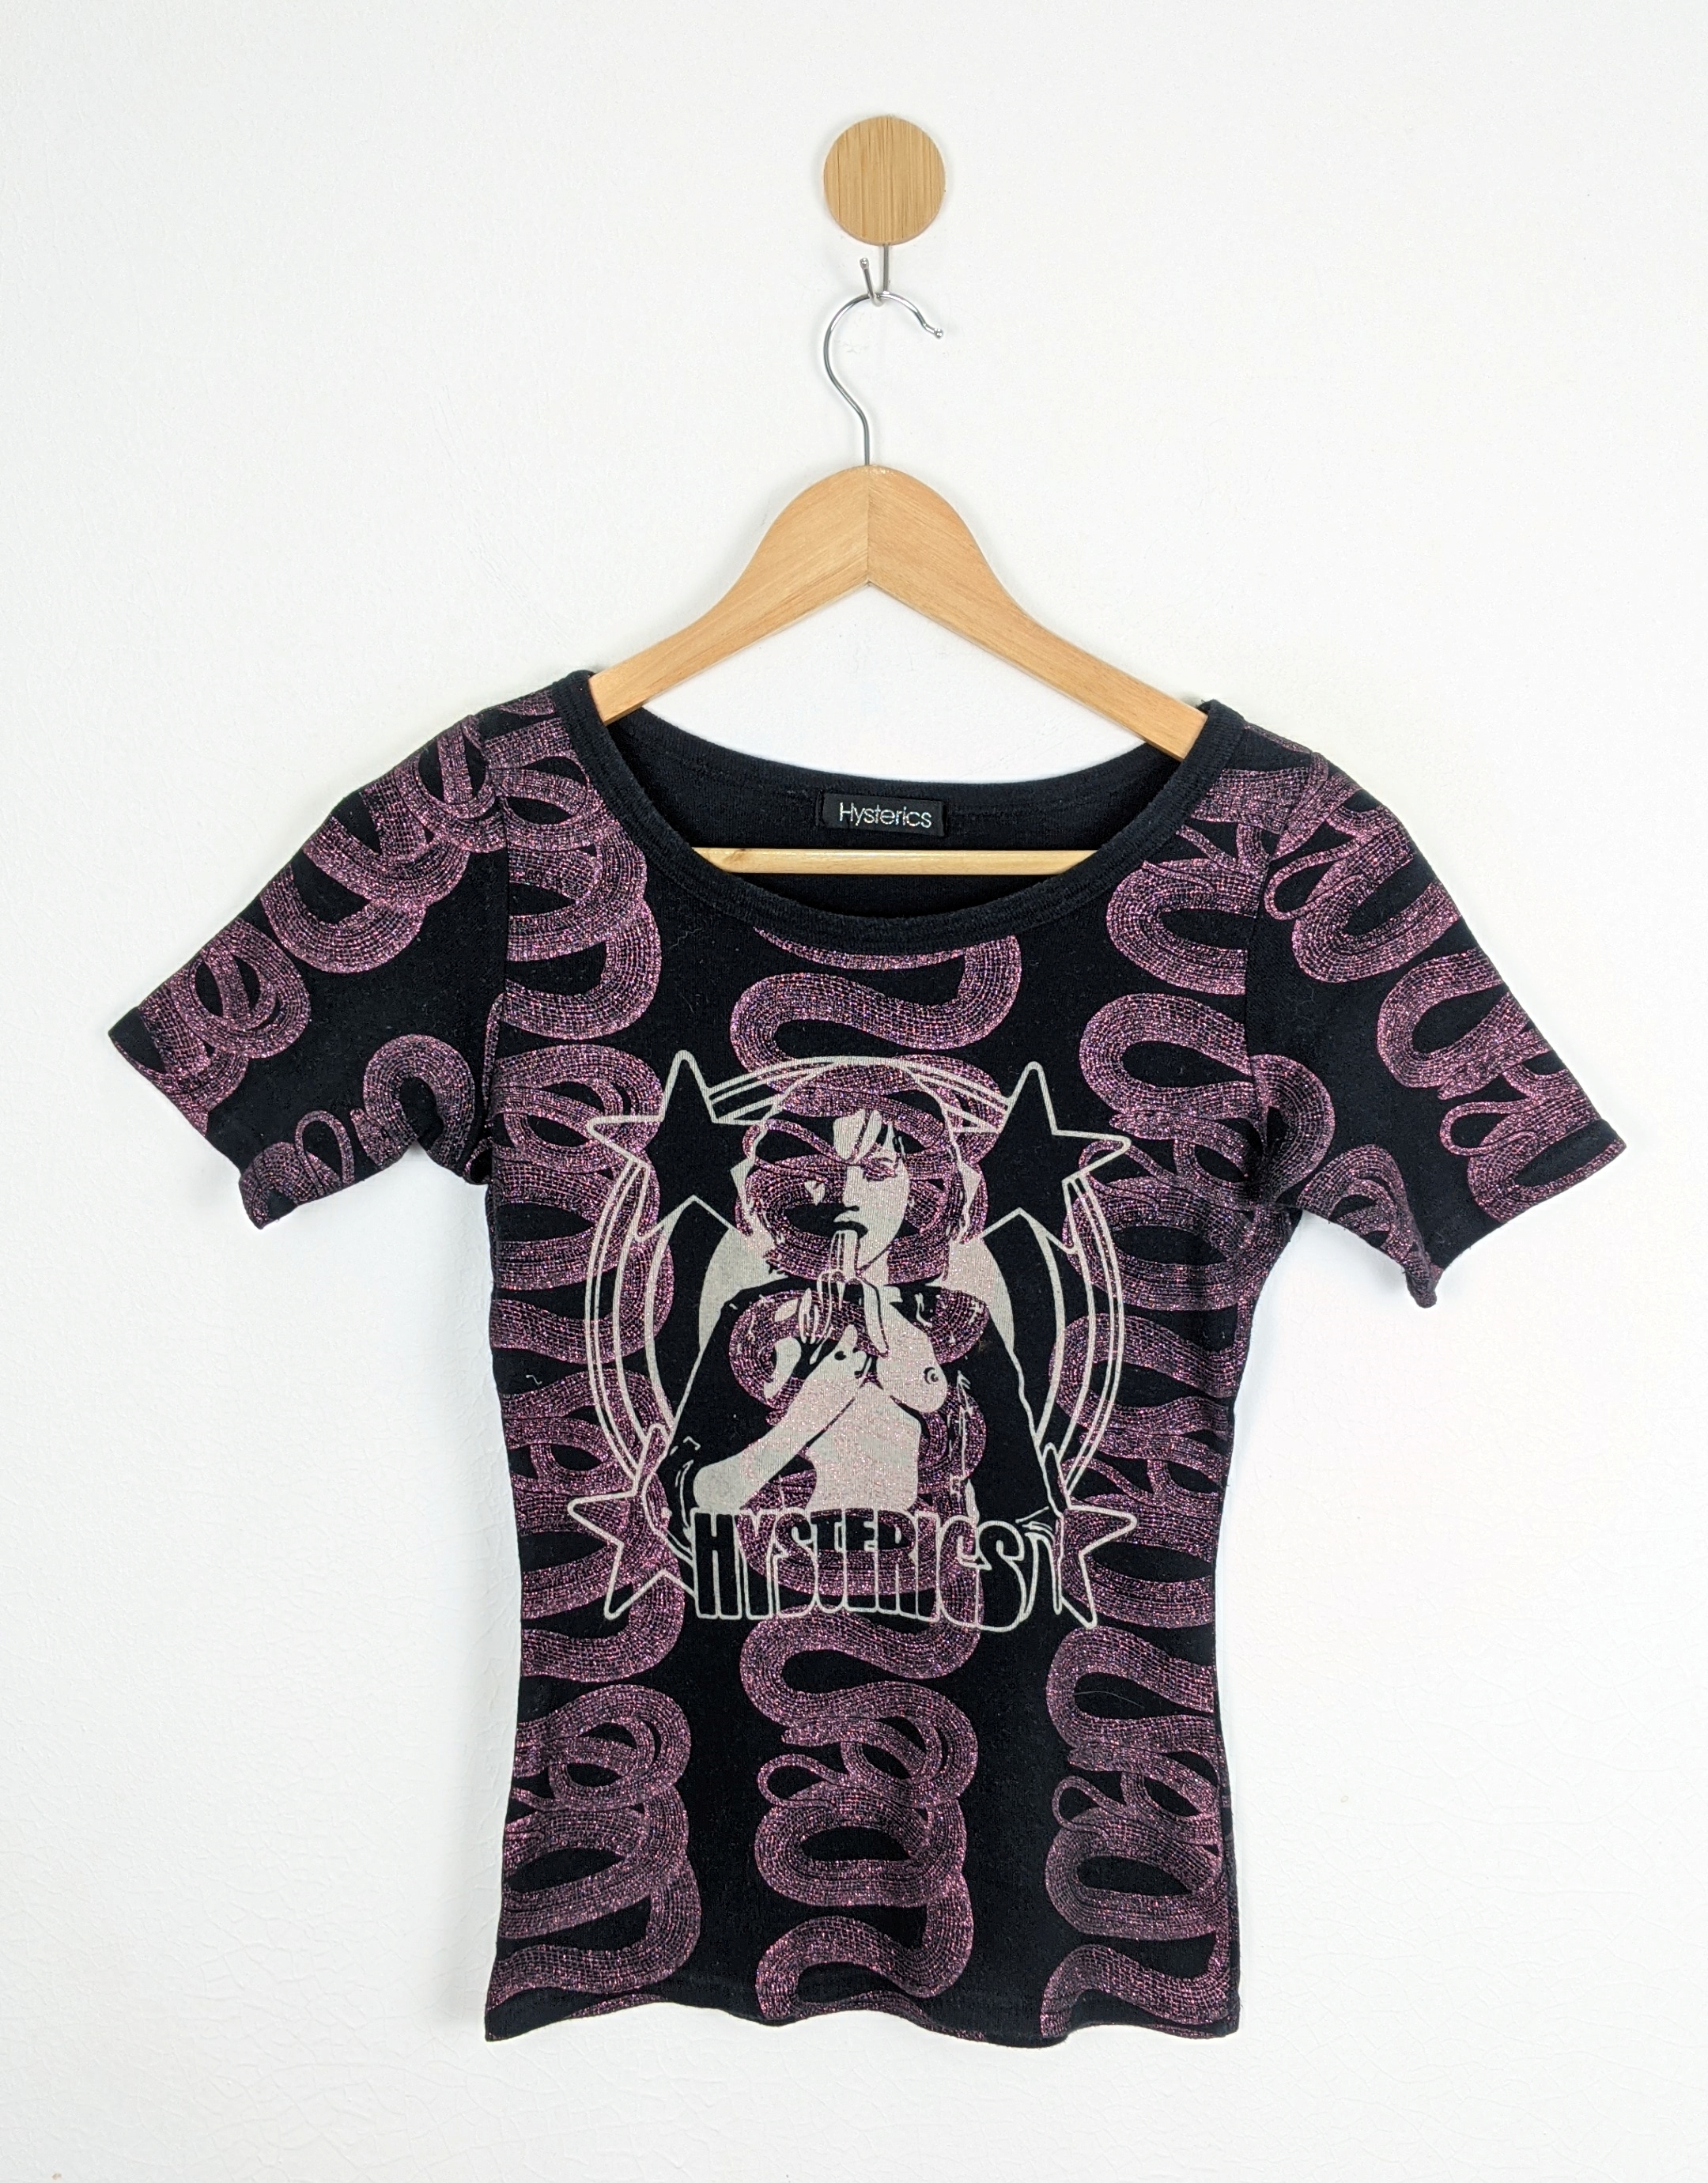 Hysteric Glamour - Hysteric Glamour Snake shirt